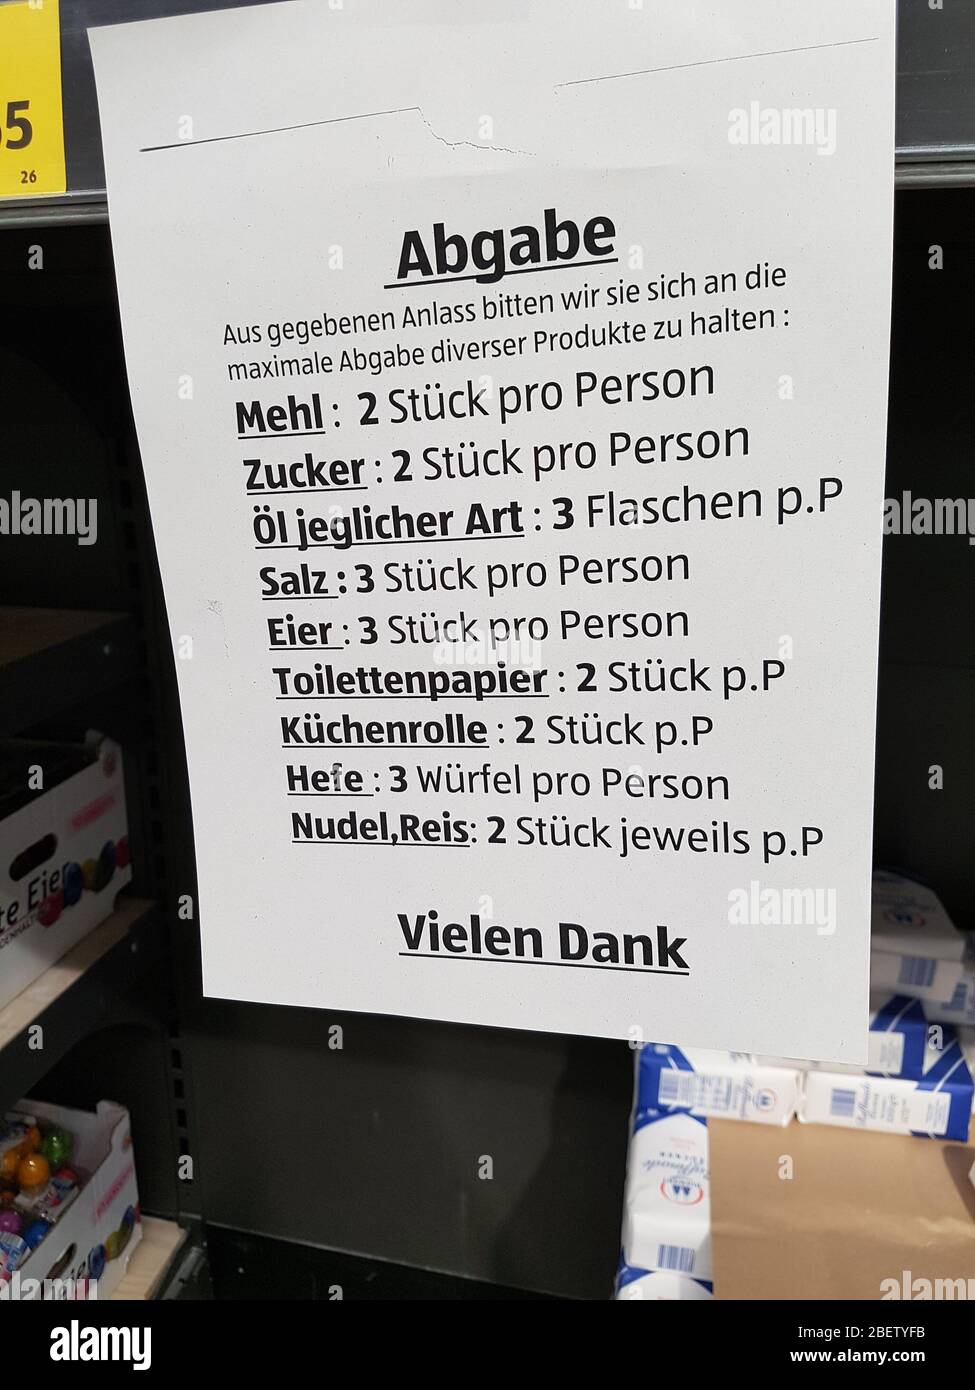 Shield / sign hanging on empty shelf in supermarket - restriction of products to limit number per person / household - panic hoarding ( Hamsterkäufe ) Stock Photo